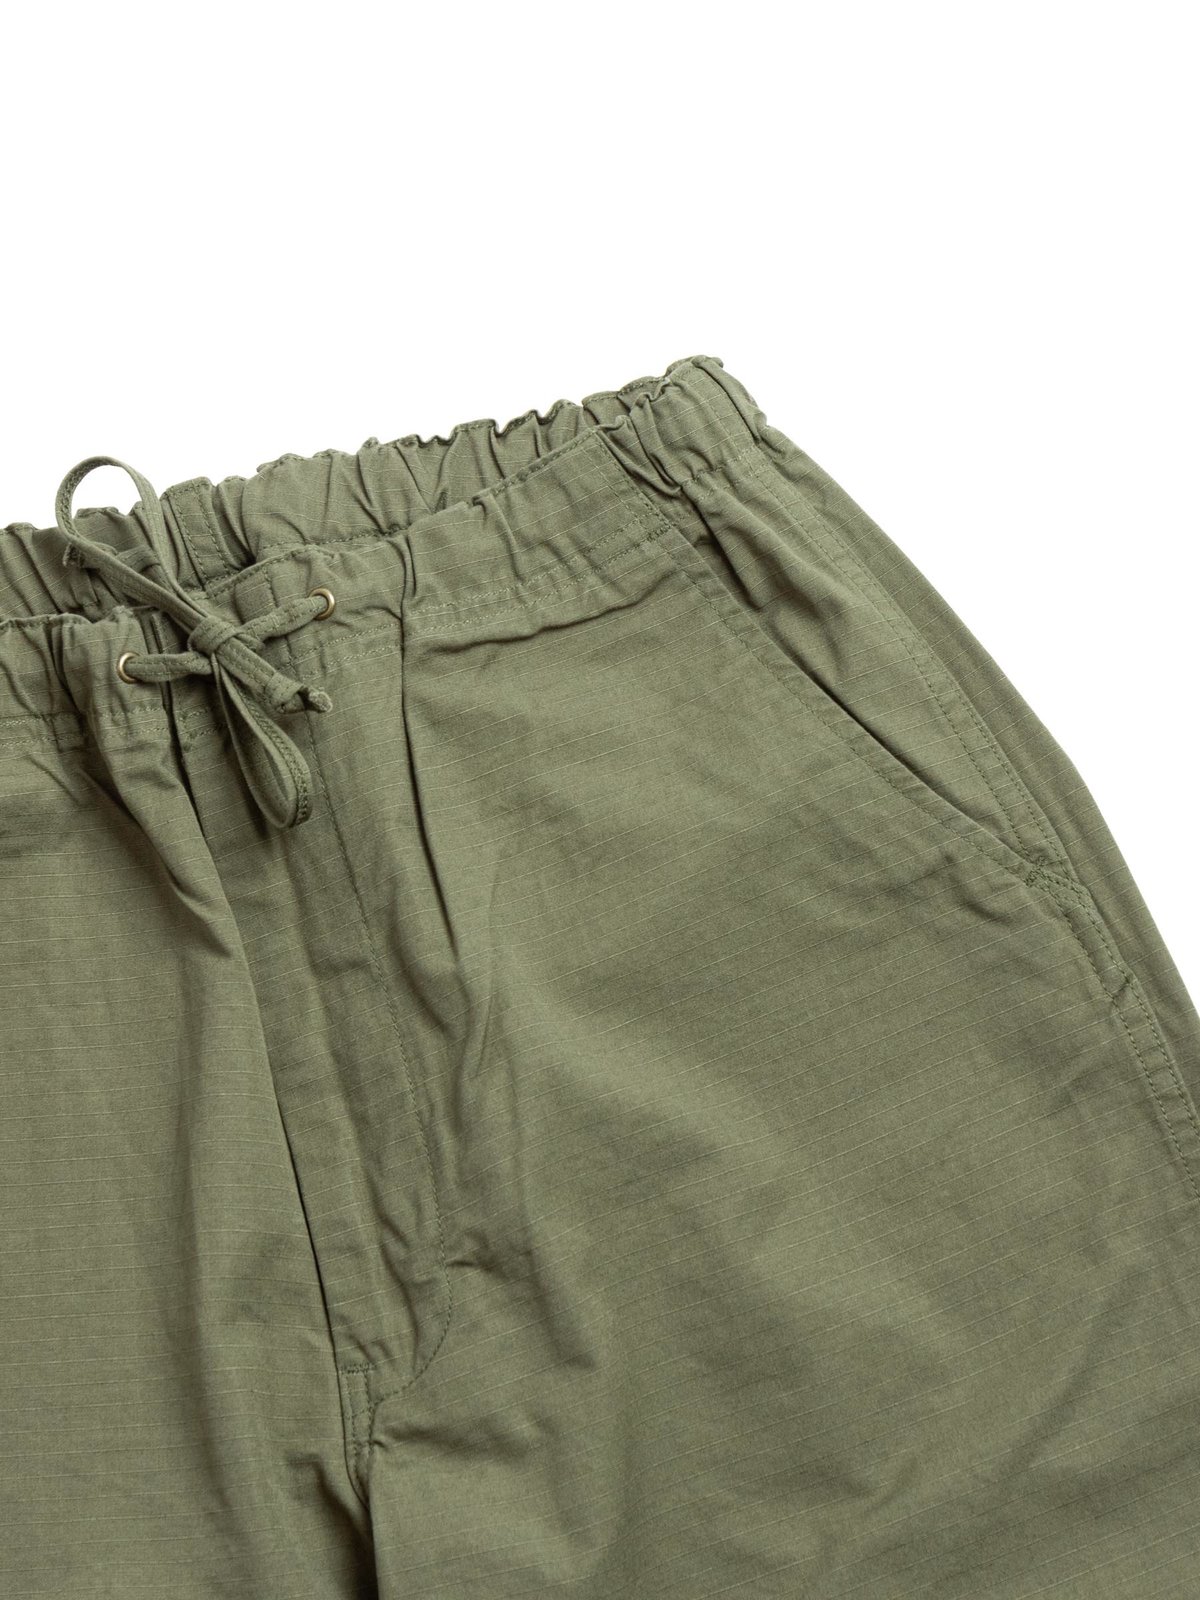 NEW YORKER PANT ARMY RIPSTOP by orSlow – The Bureau Belfast - The ...